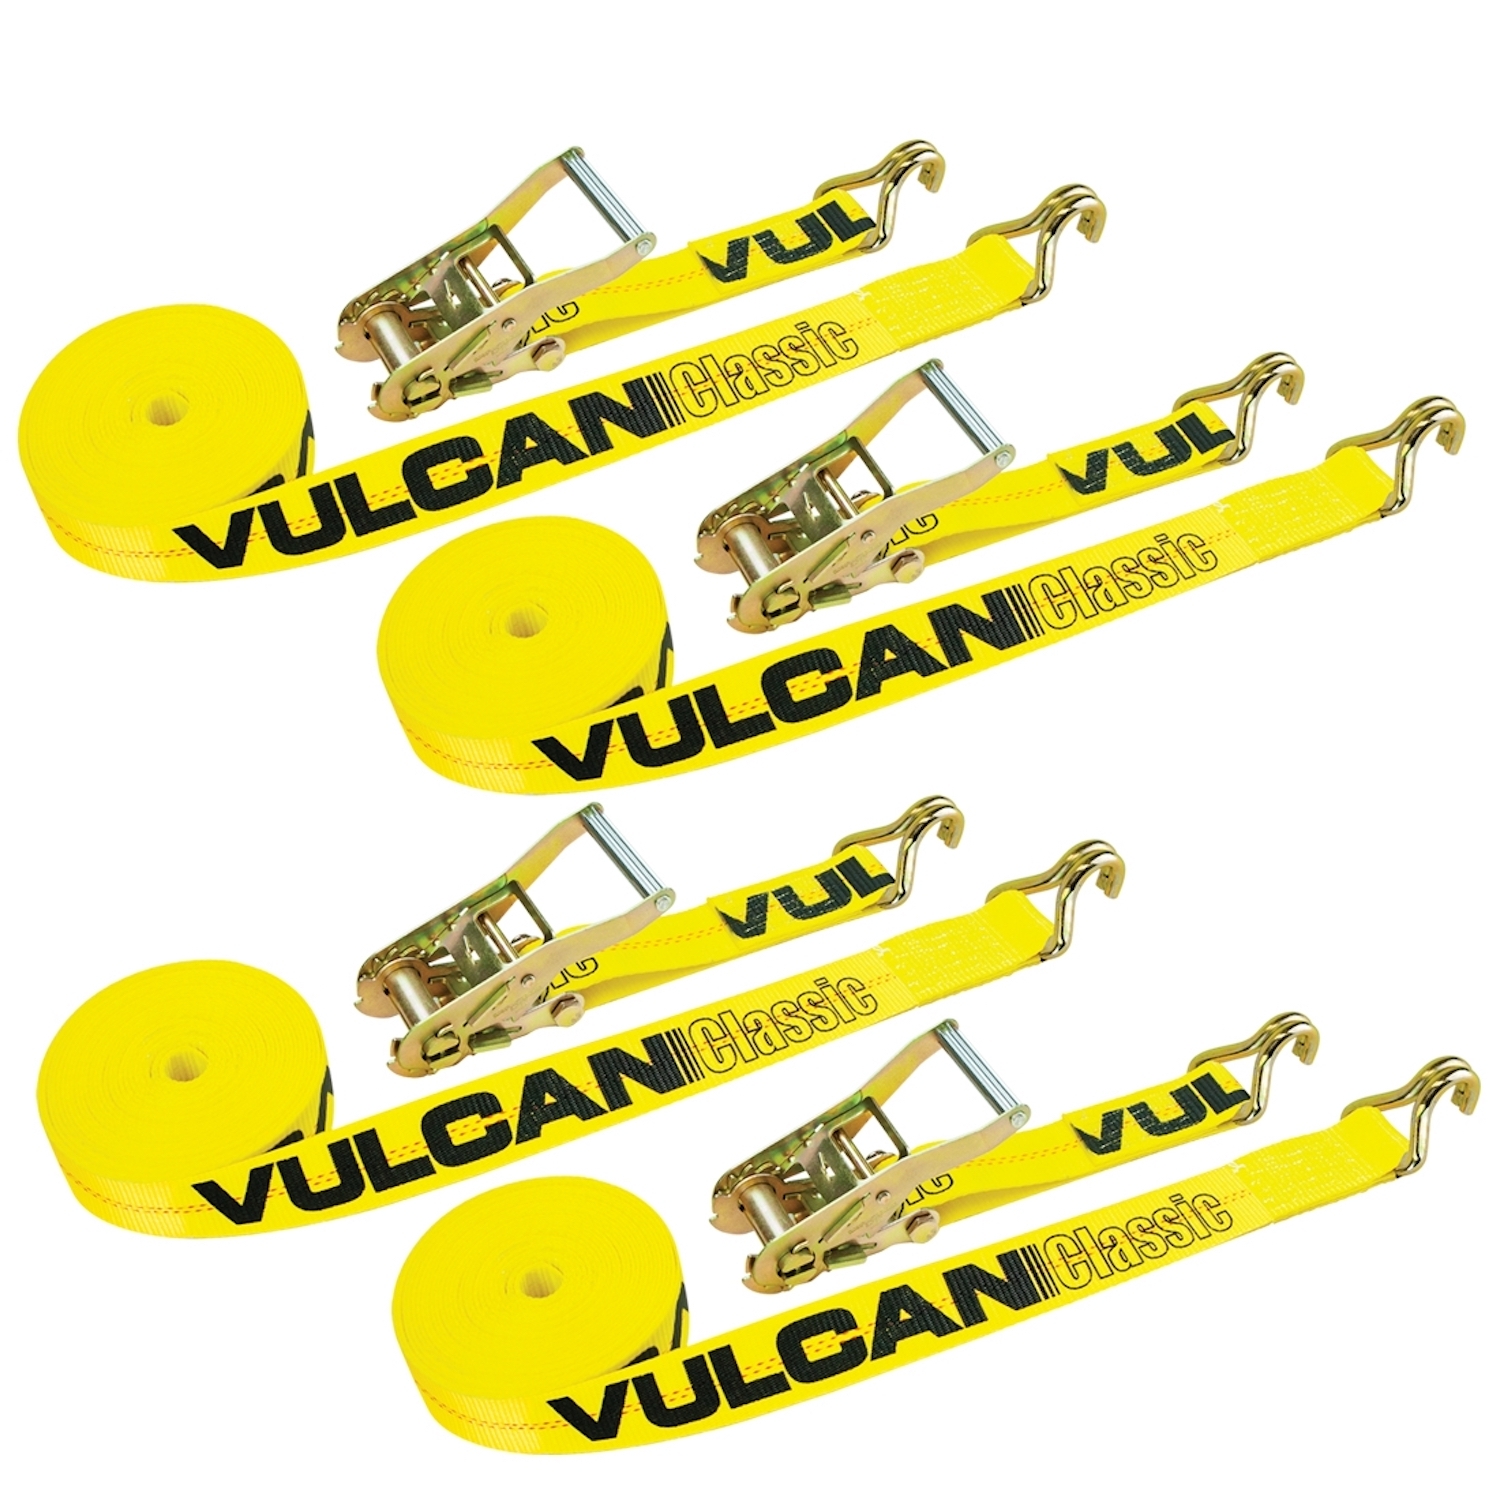  VULCAN Axle Tie Down Combo Strap with Snap Hook Ratchet - 2  Inch x 114 Inch - 4 Pack - Classic Yellow - 3,300 Pound Safe Working Load :  Industrial & Scientific